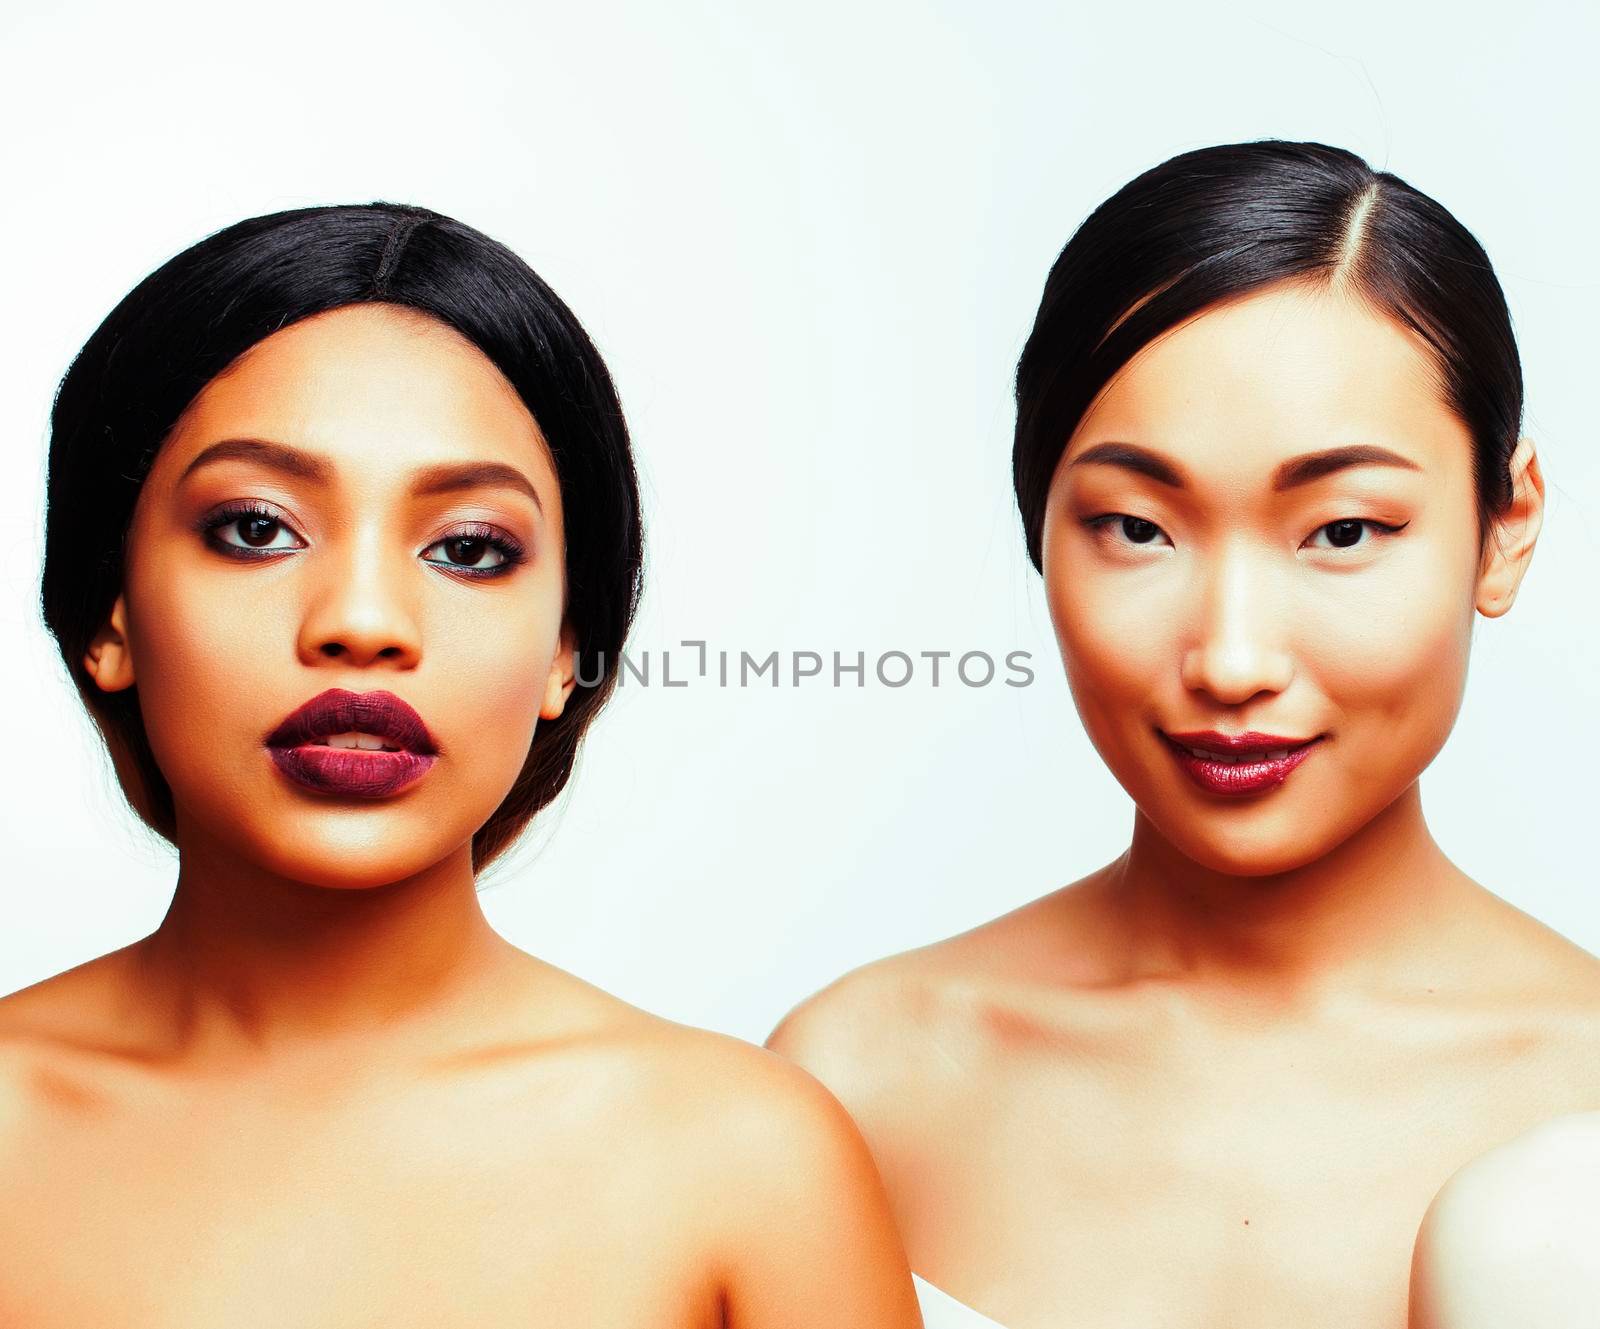 different nation woman: african-american and asian together isolated on white background happy smiling, diverse type on skin, lifestyle people concept close up